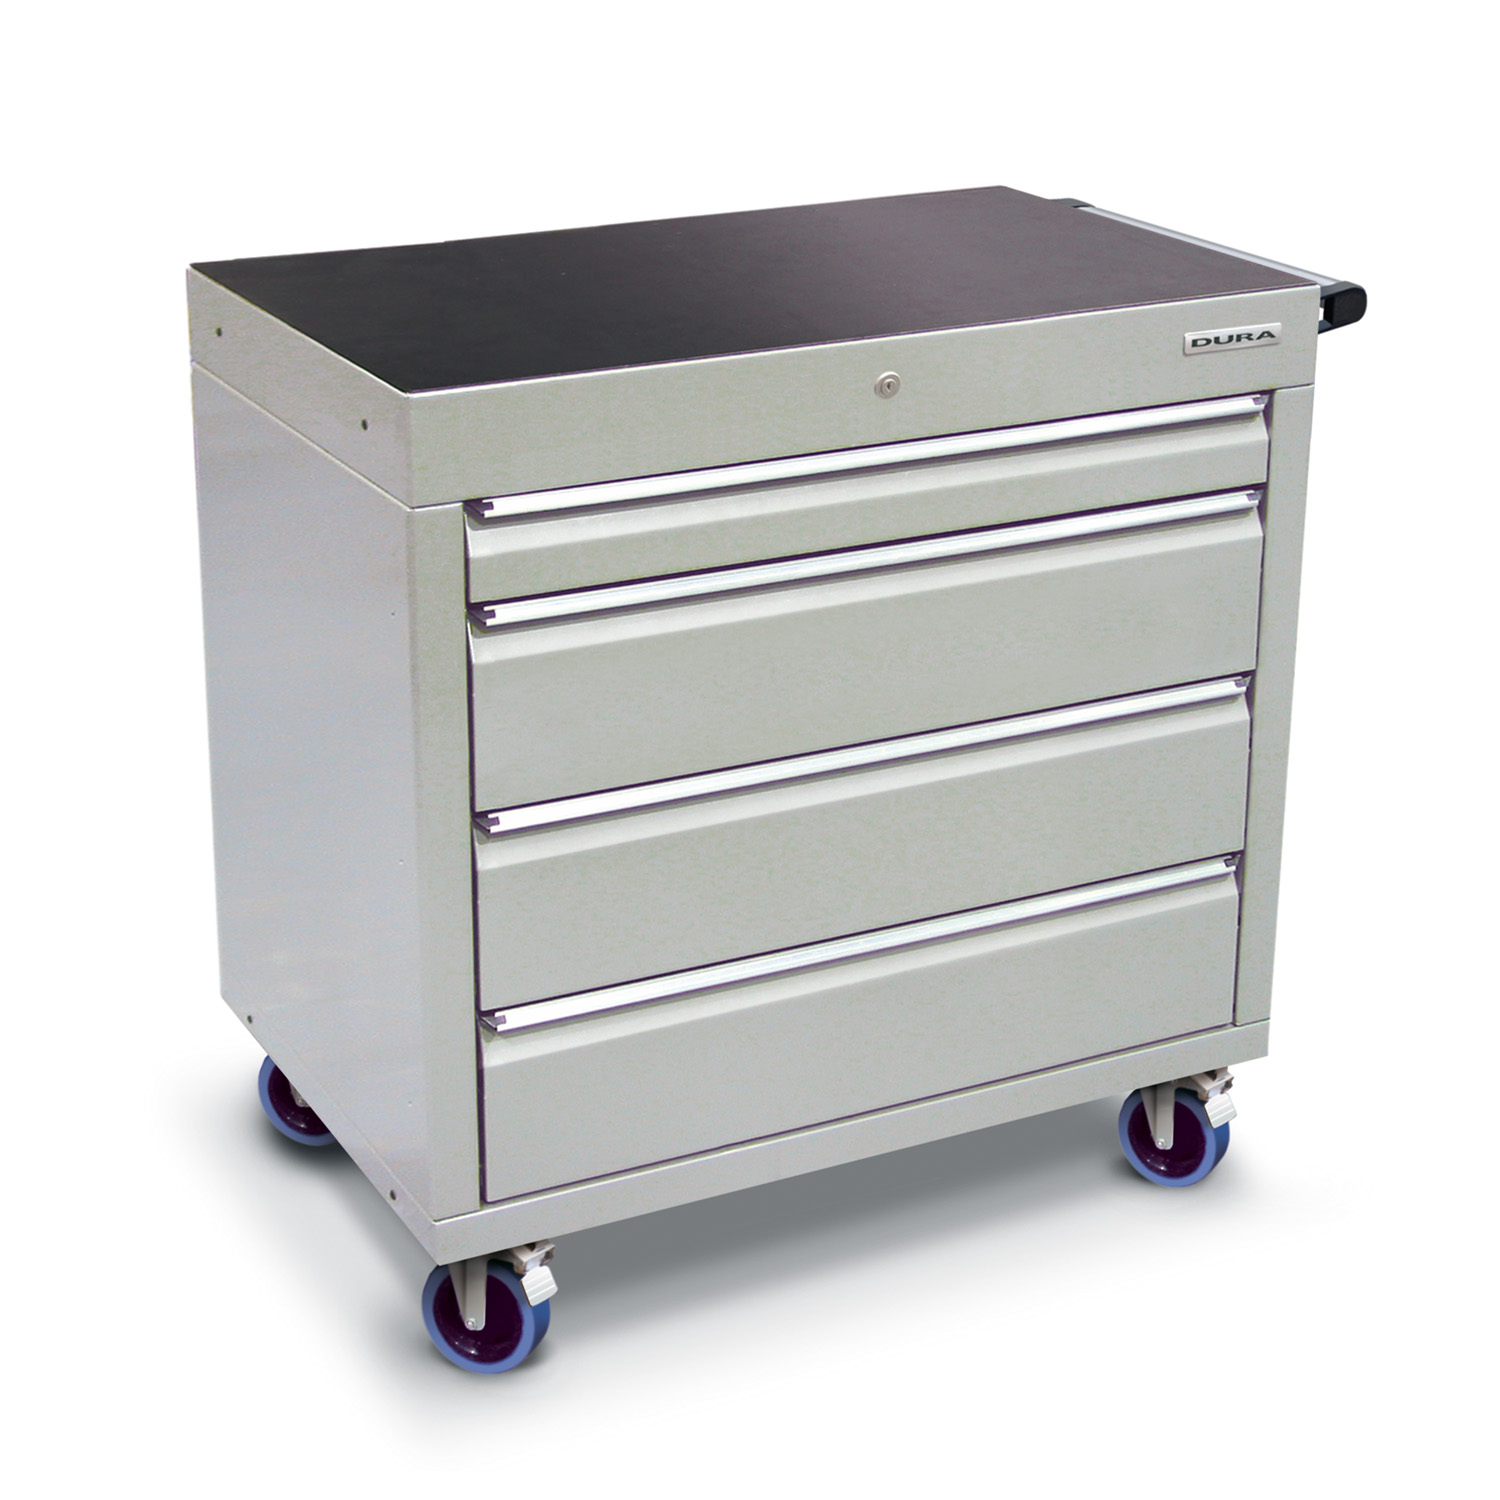 900 series cabinet with 4 drawers (1 medium, 3 large) and castors